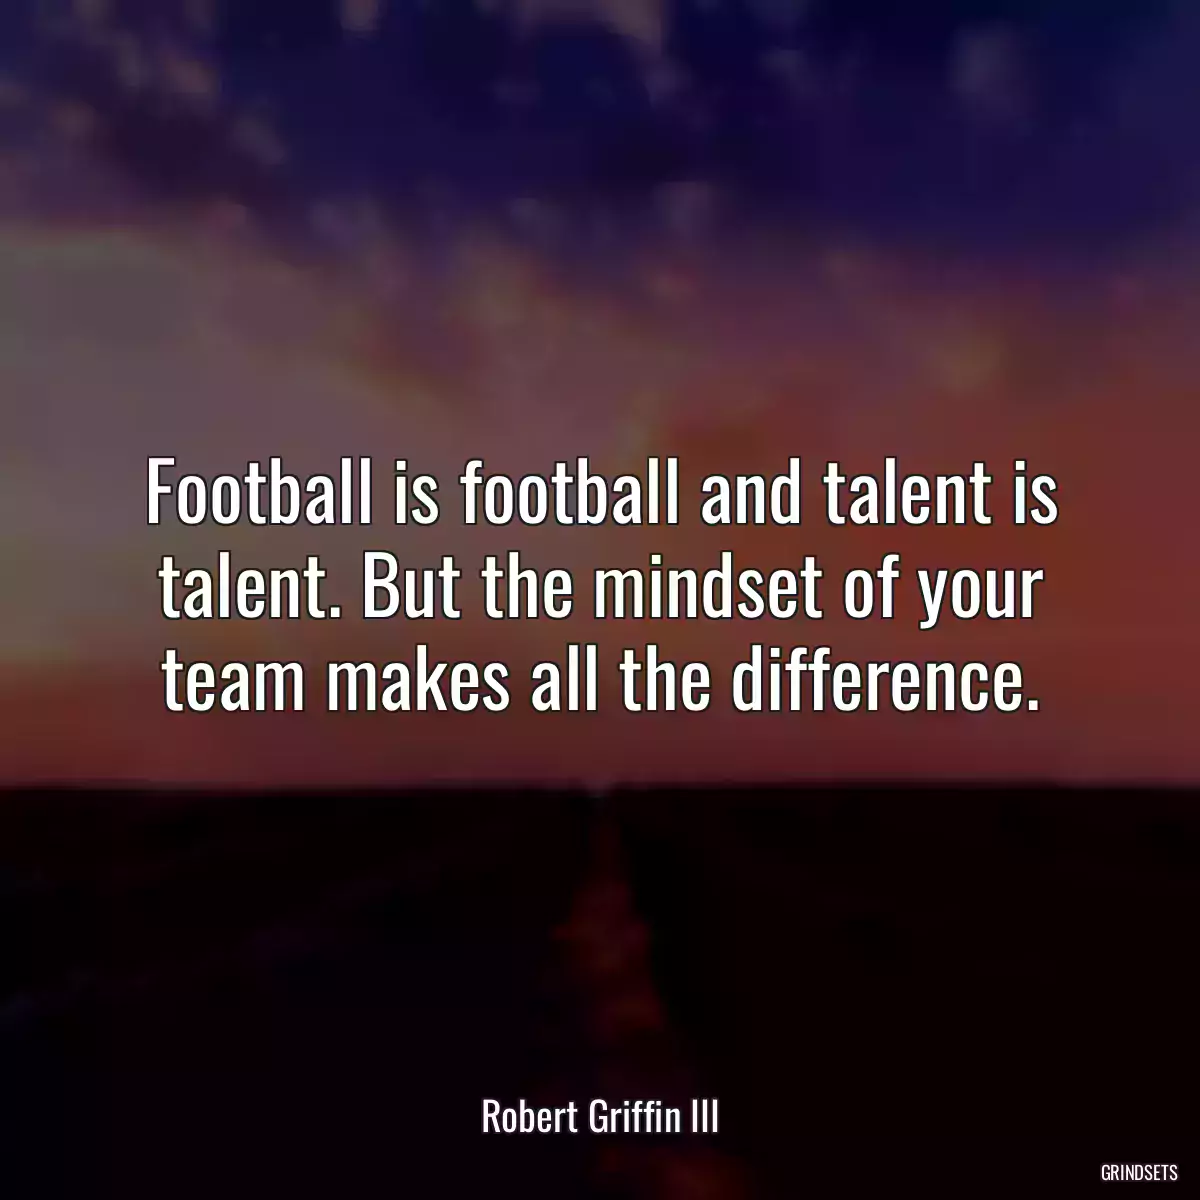 Football is football and talent is talent. But the mindset of your team makes all the difference.